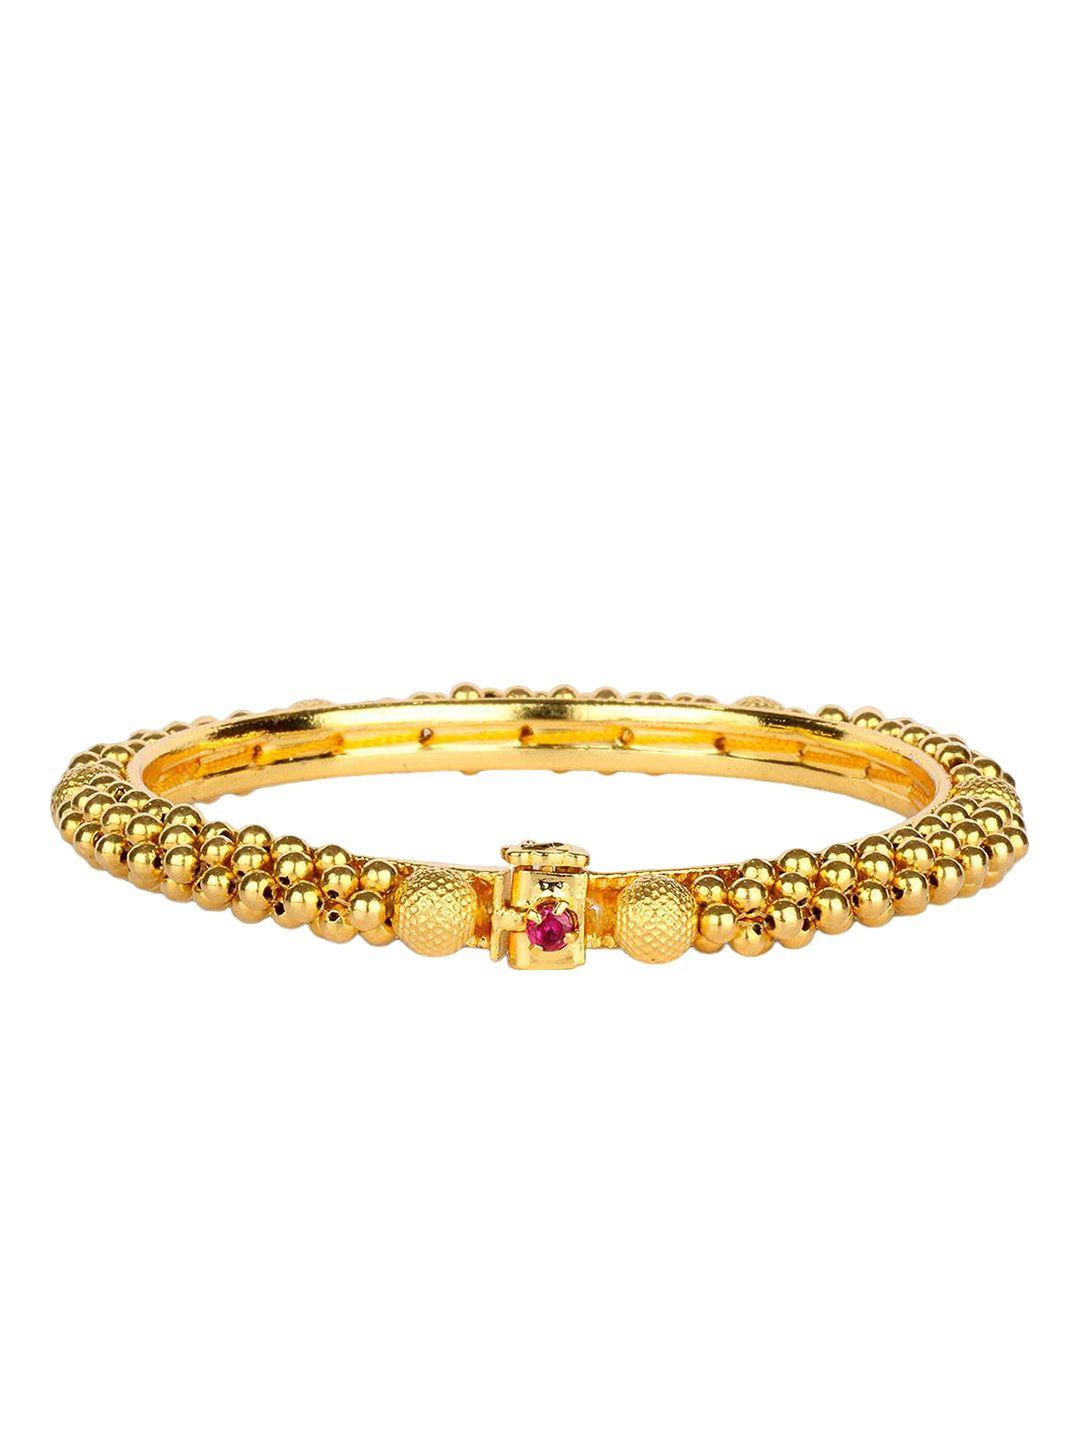 candere a kalyan jewellers company women 22kt (916) gold traditional tushi bangle- 2.31gm